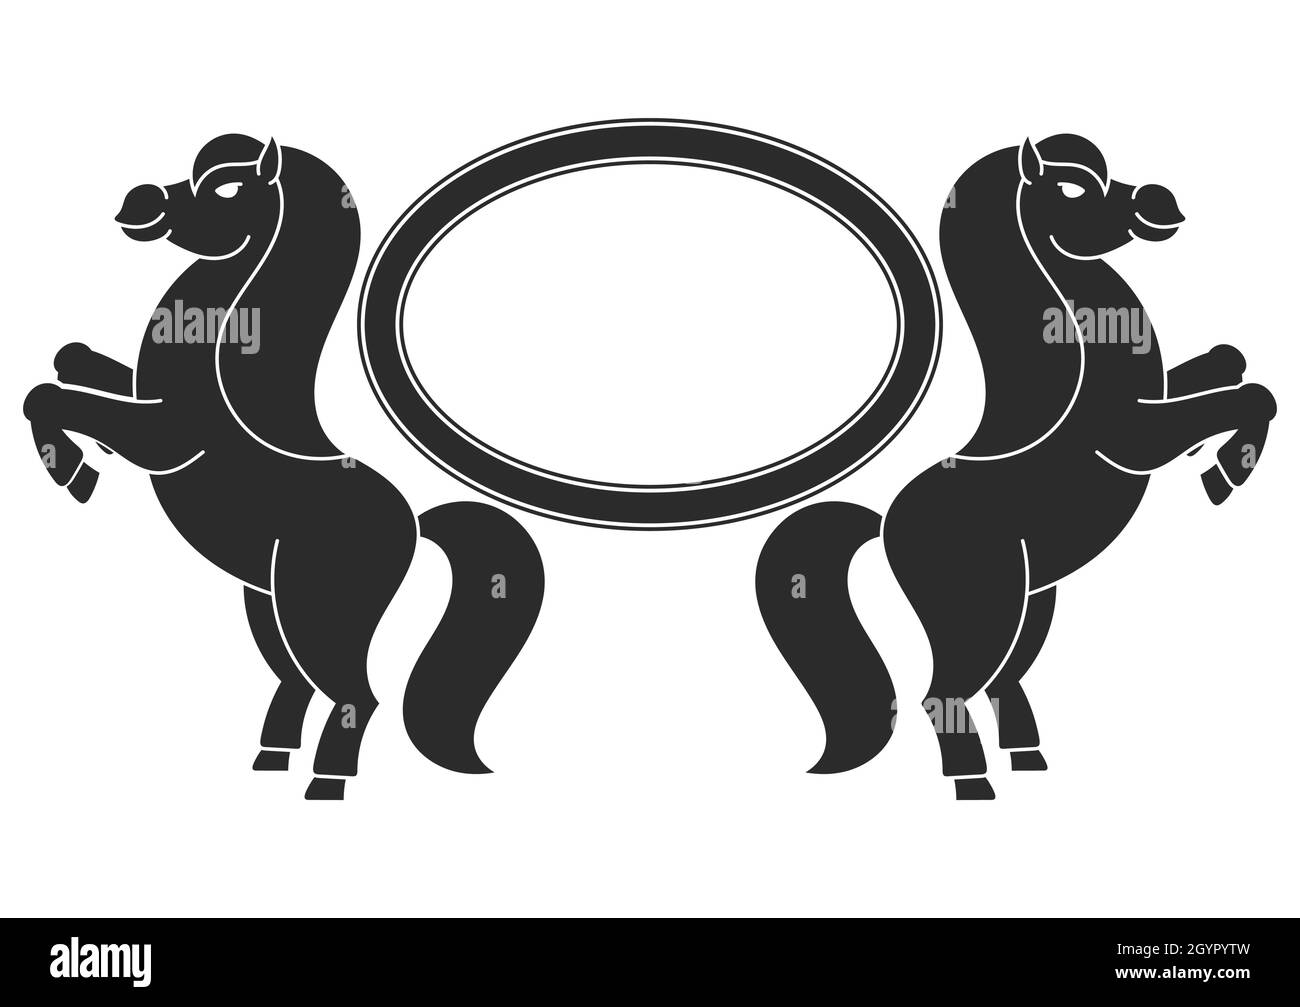 The two horses reared up. With space for your text. Element for the design of labels, sites. Black silhouette. Simple flat vector illustration. Stock Vector